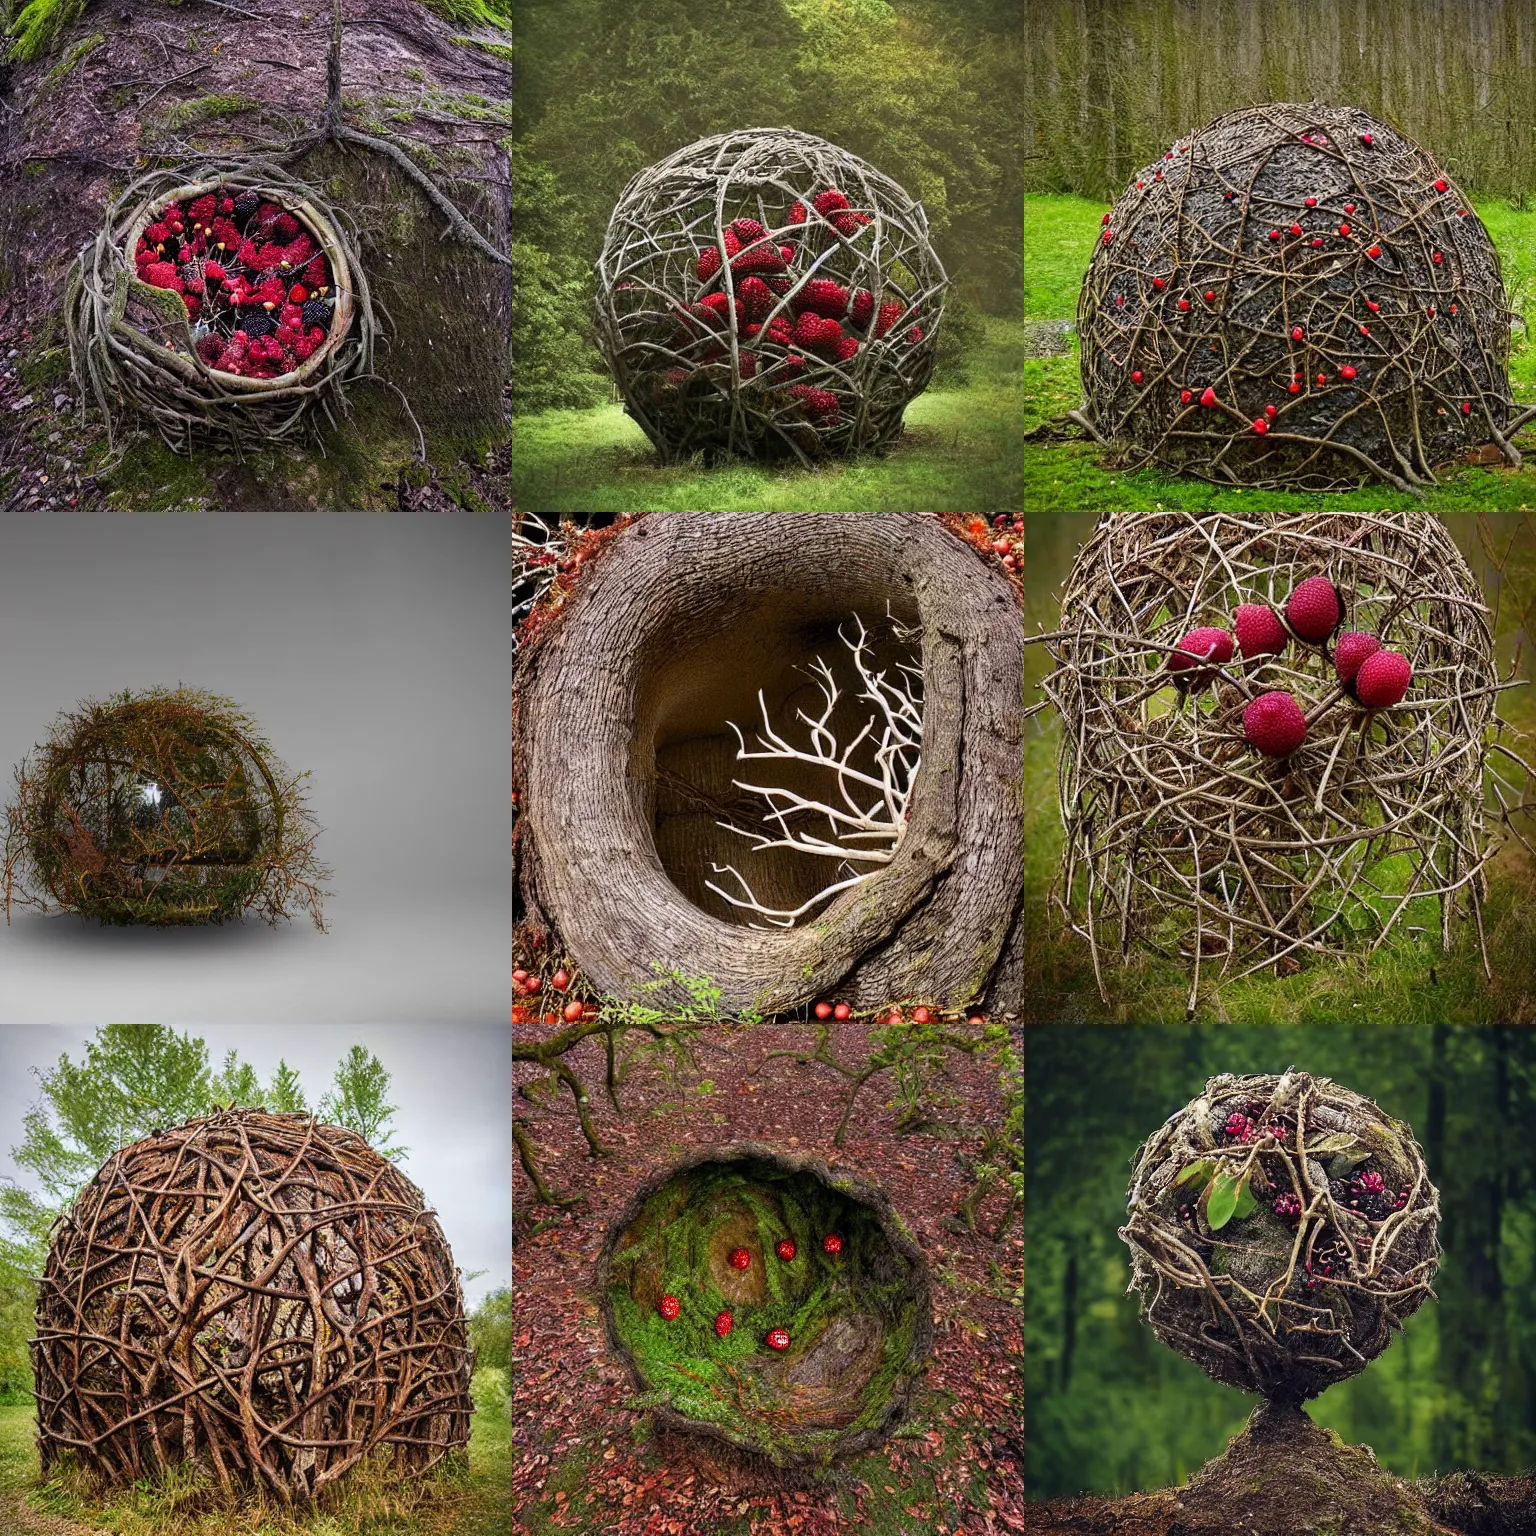 Prompt: an environment art sculpture by Nils-Udo, leaves twigs wood, nature, natural, round form, berries inside structure, beautiful